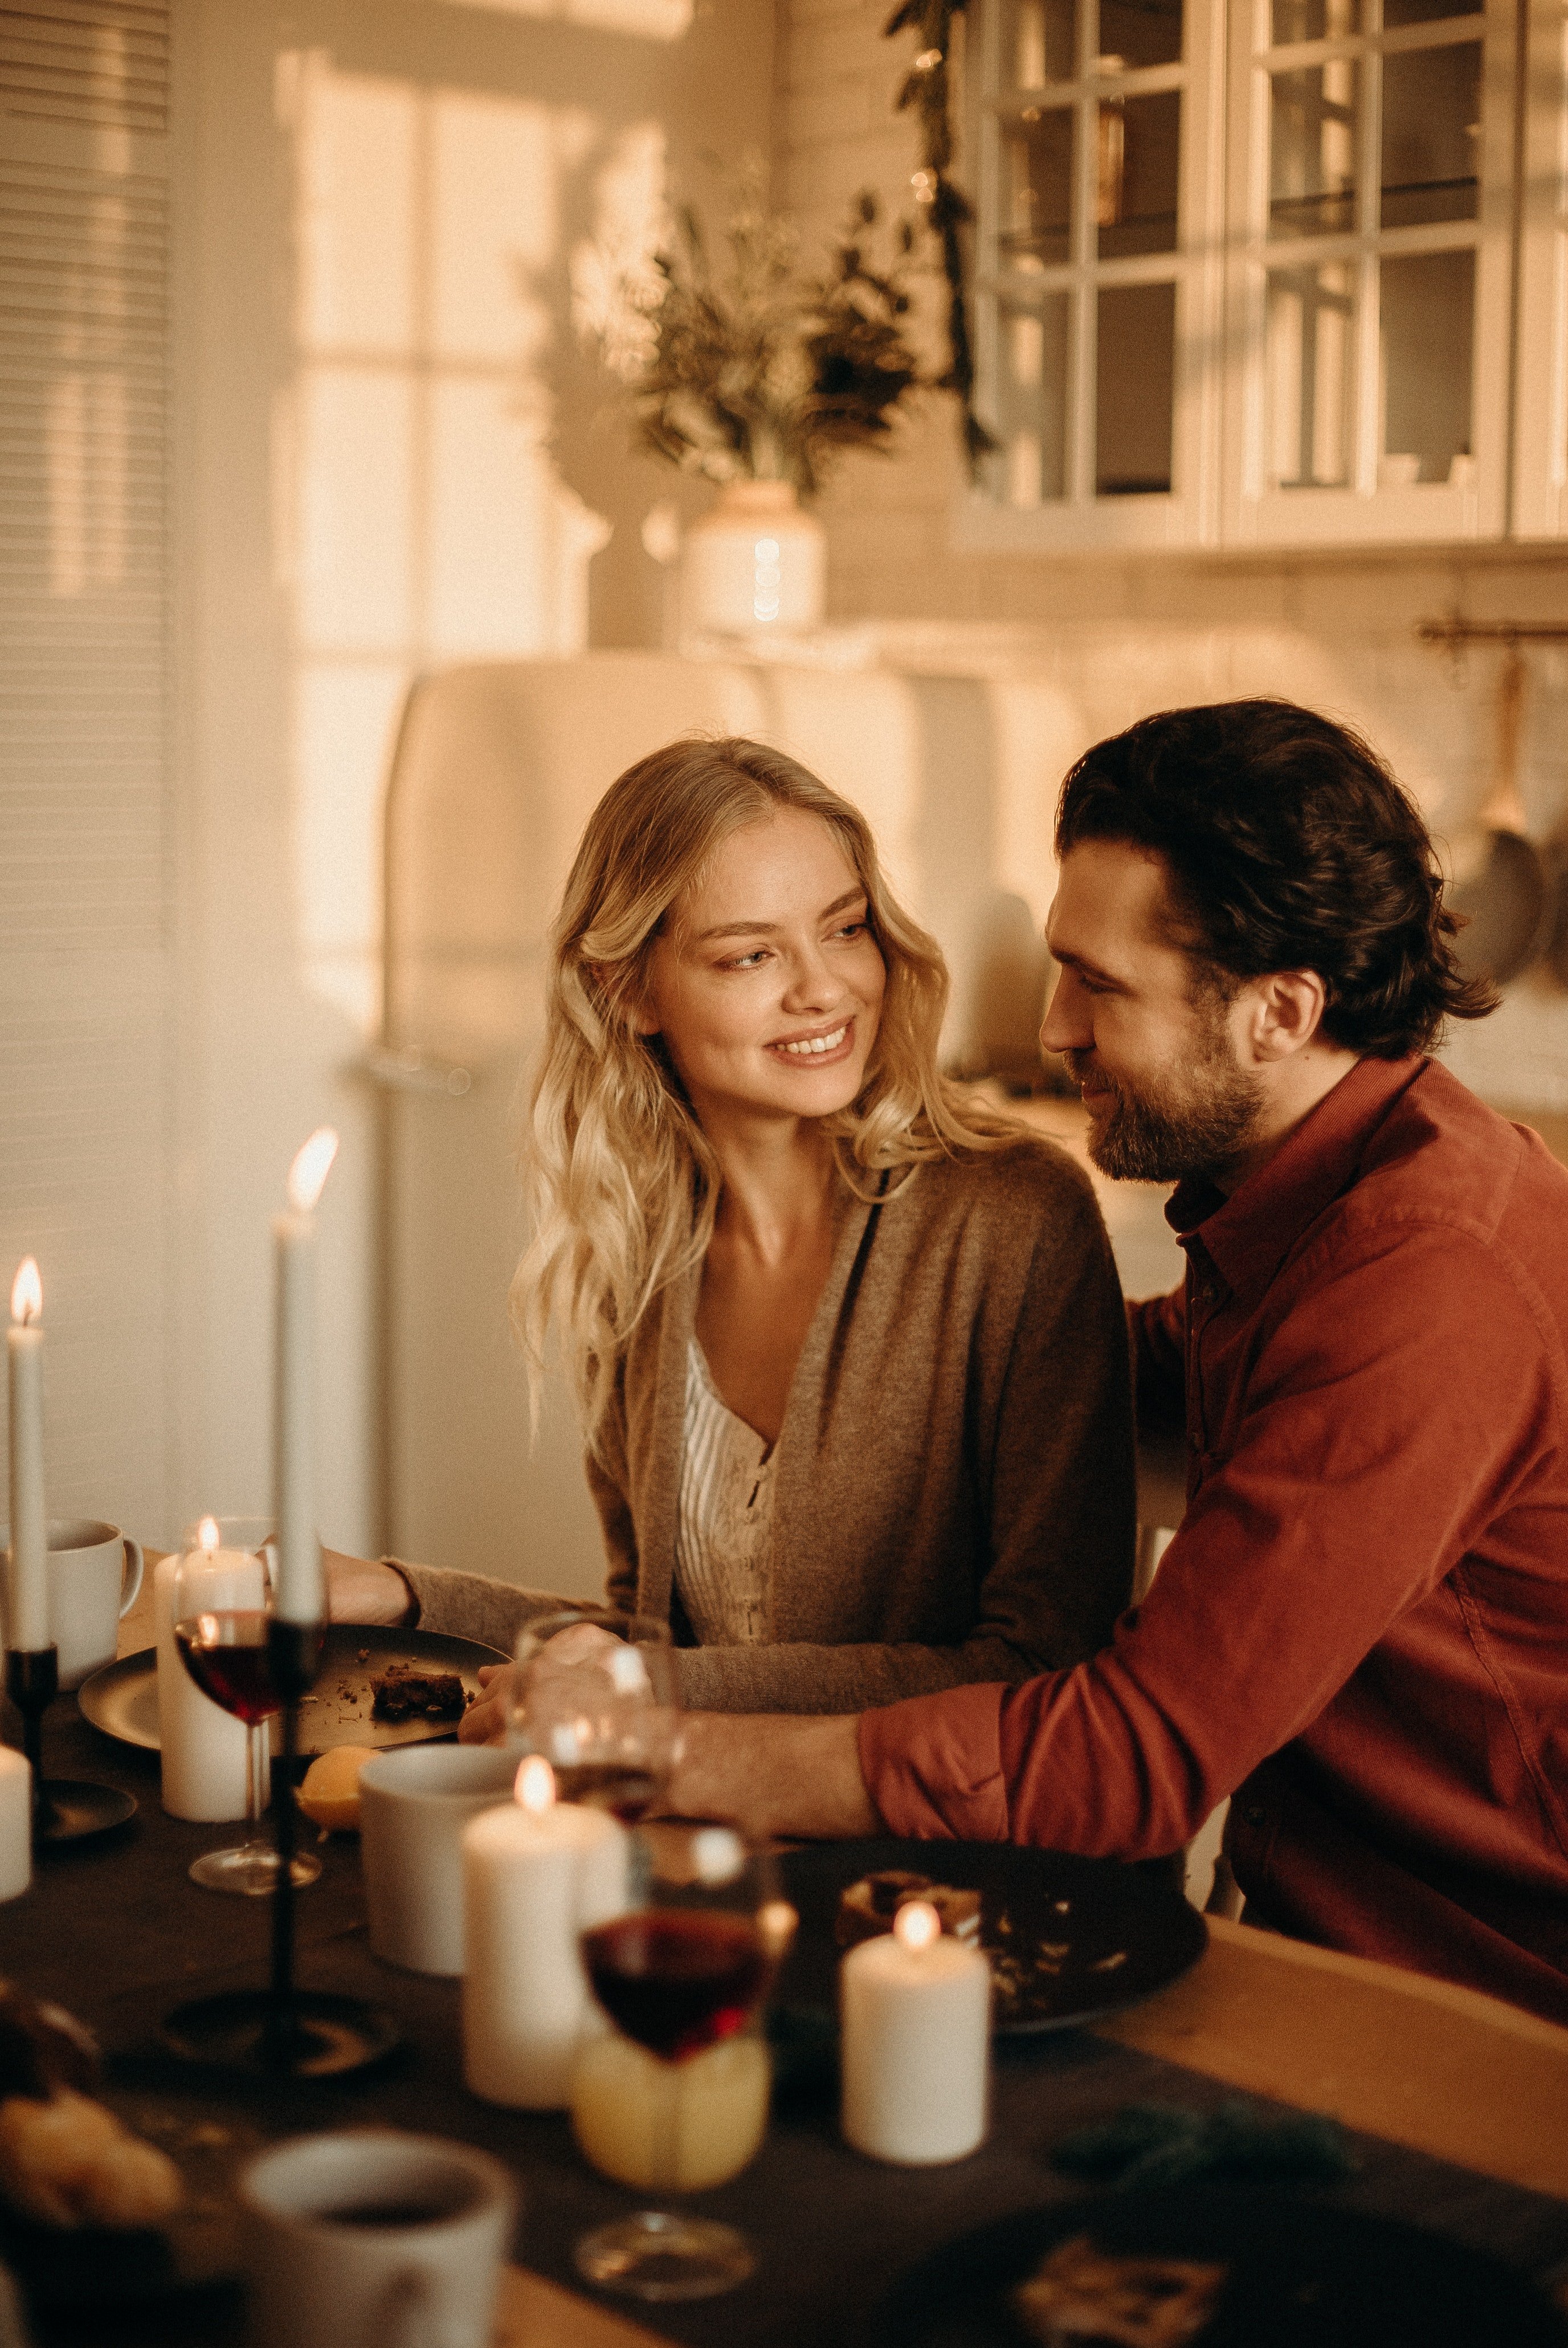 We were having a romantic dinner date, and our kids were away for the weekend. | Photo: Pexels